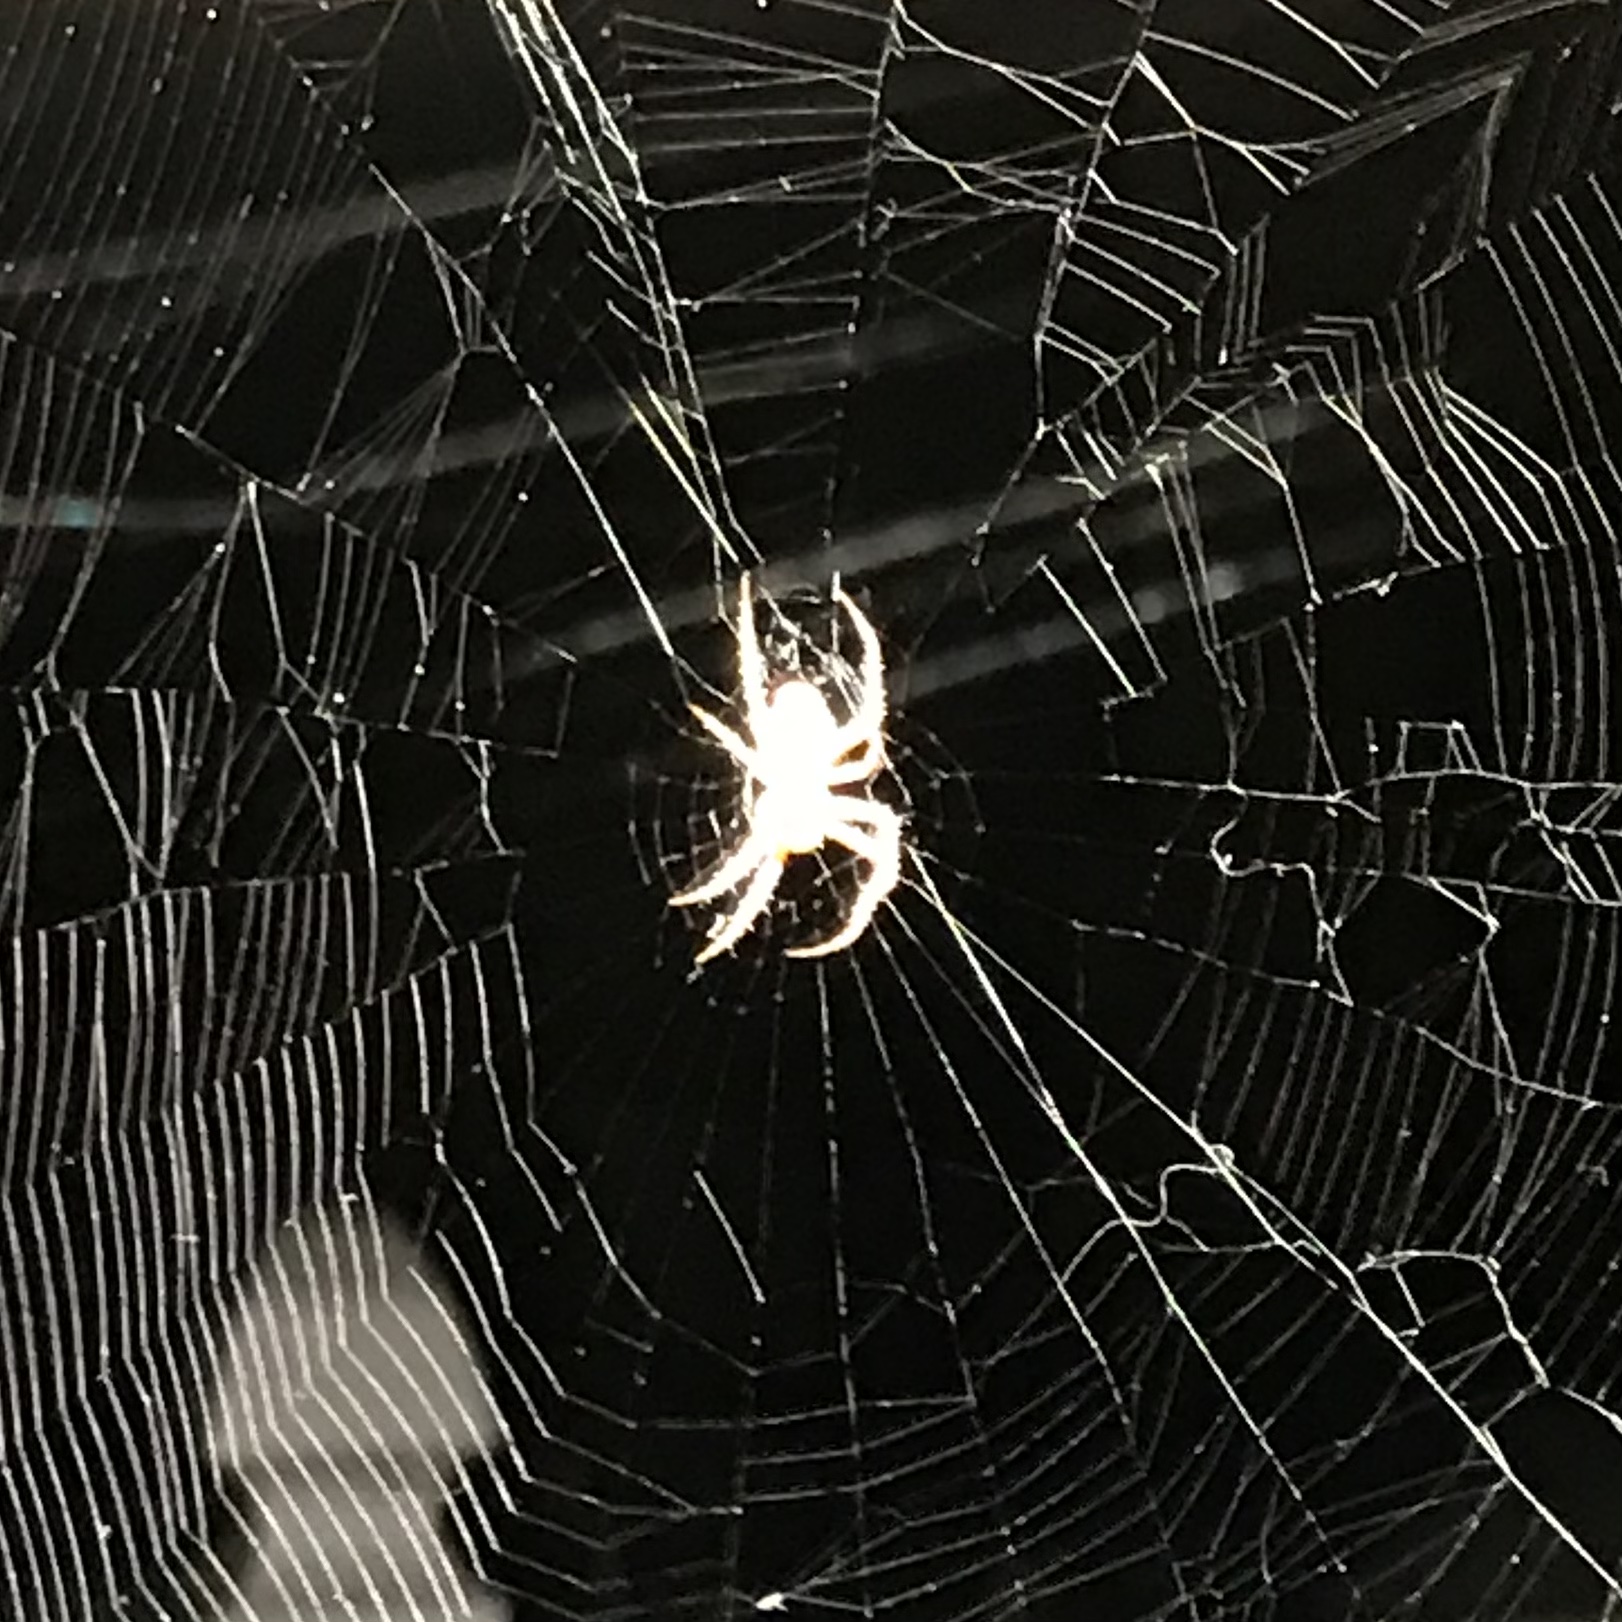 A Spider in its Web